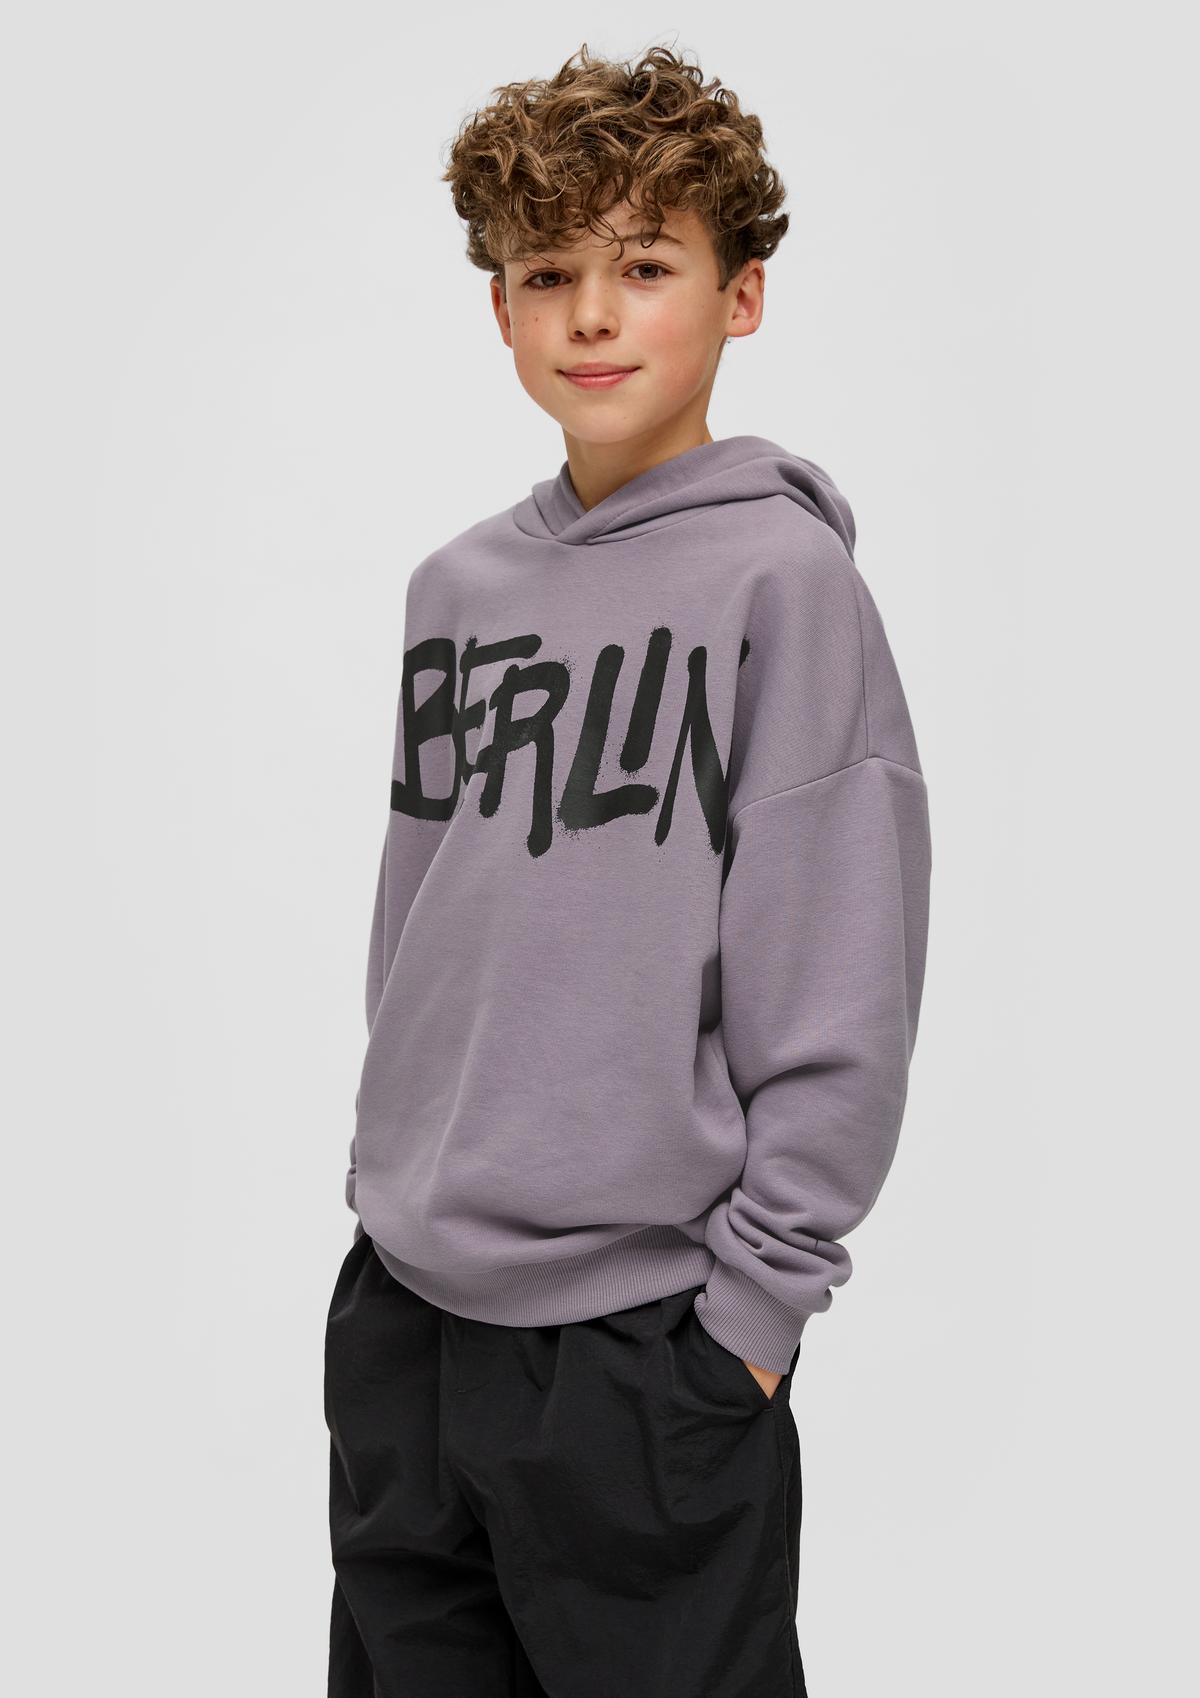 s.Oliver Sweatshirt with printed lettering